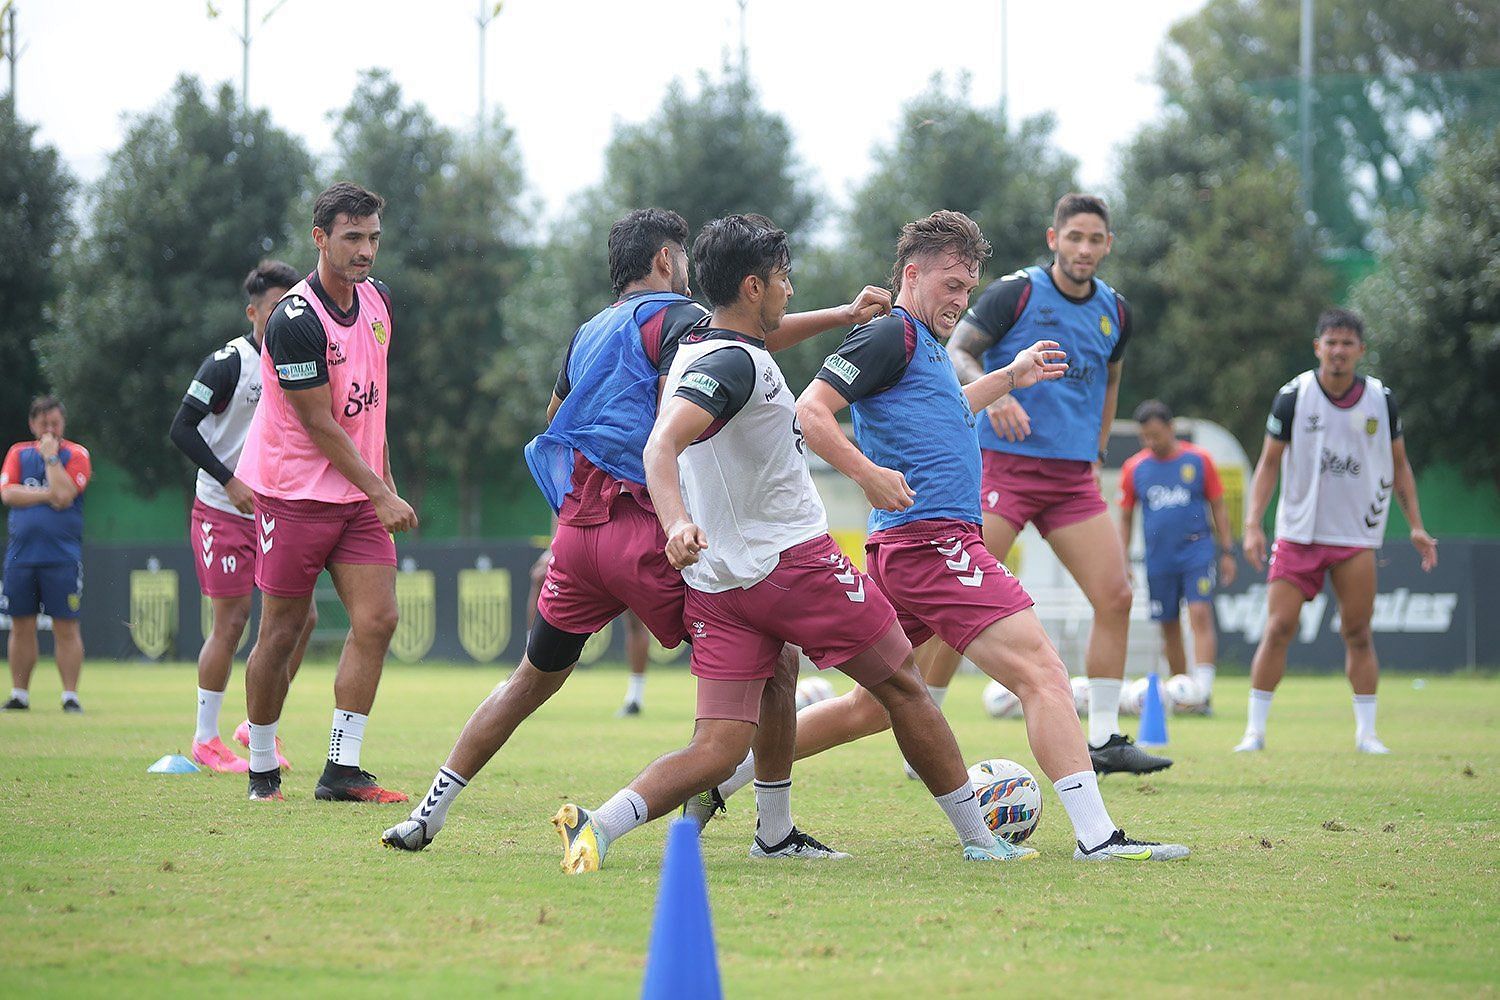 Hyderabad FC in training ahead of their visit to Kolkata. Hitesh Sharma is seen grappling for the ball with Joe Knowles in the foreground. (Credits: HFC)